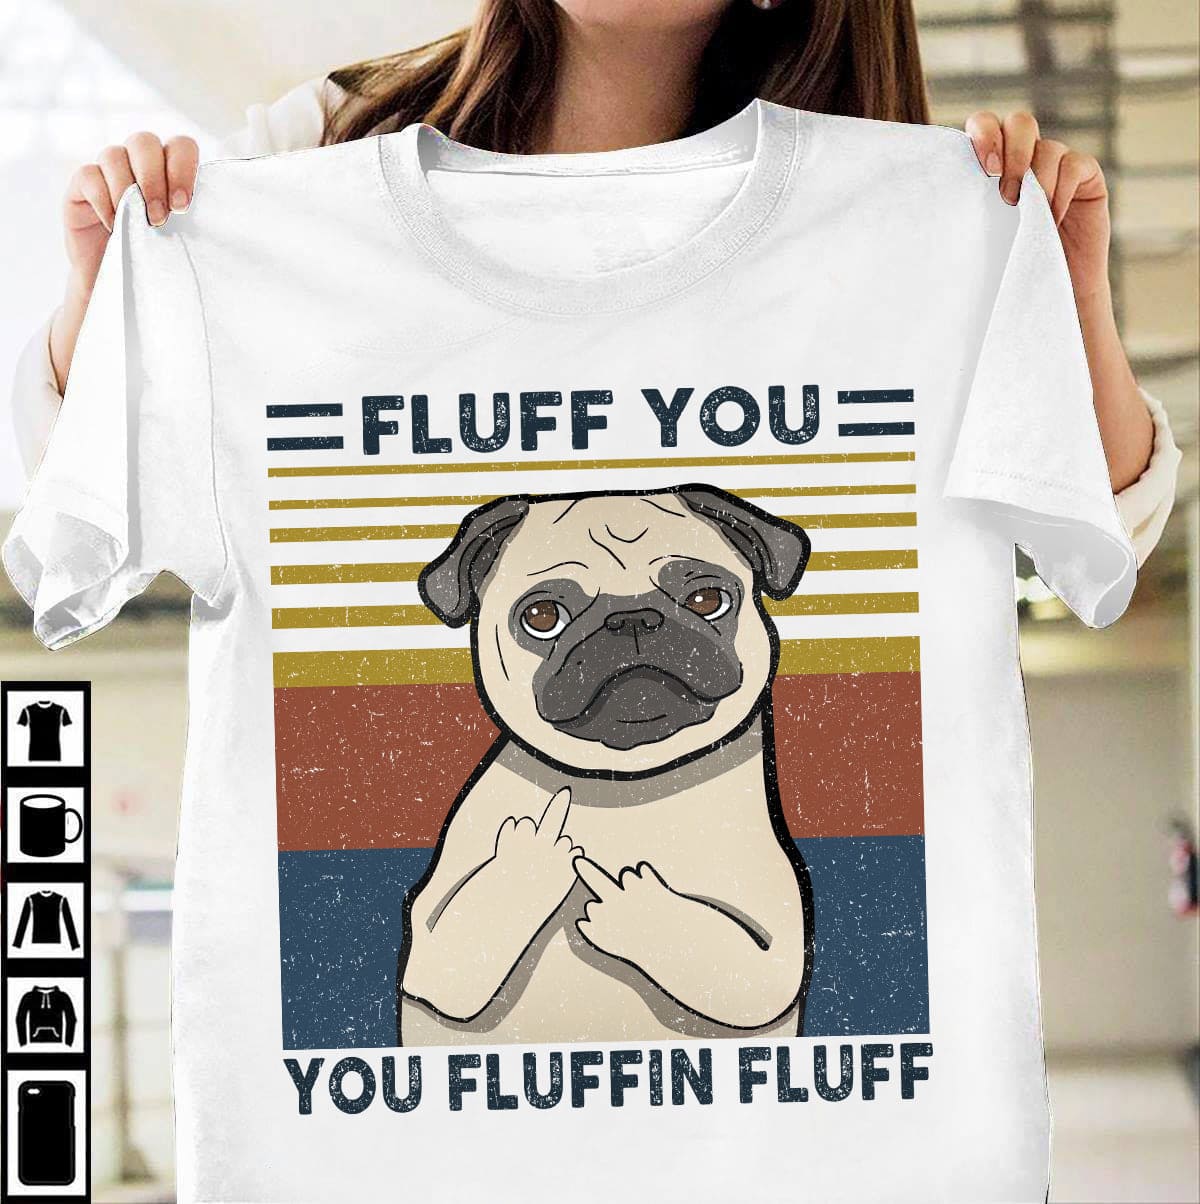 Fluff you, you fluffin fluff - Pug dog graphic T-shirt